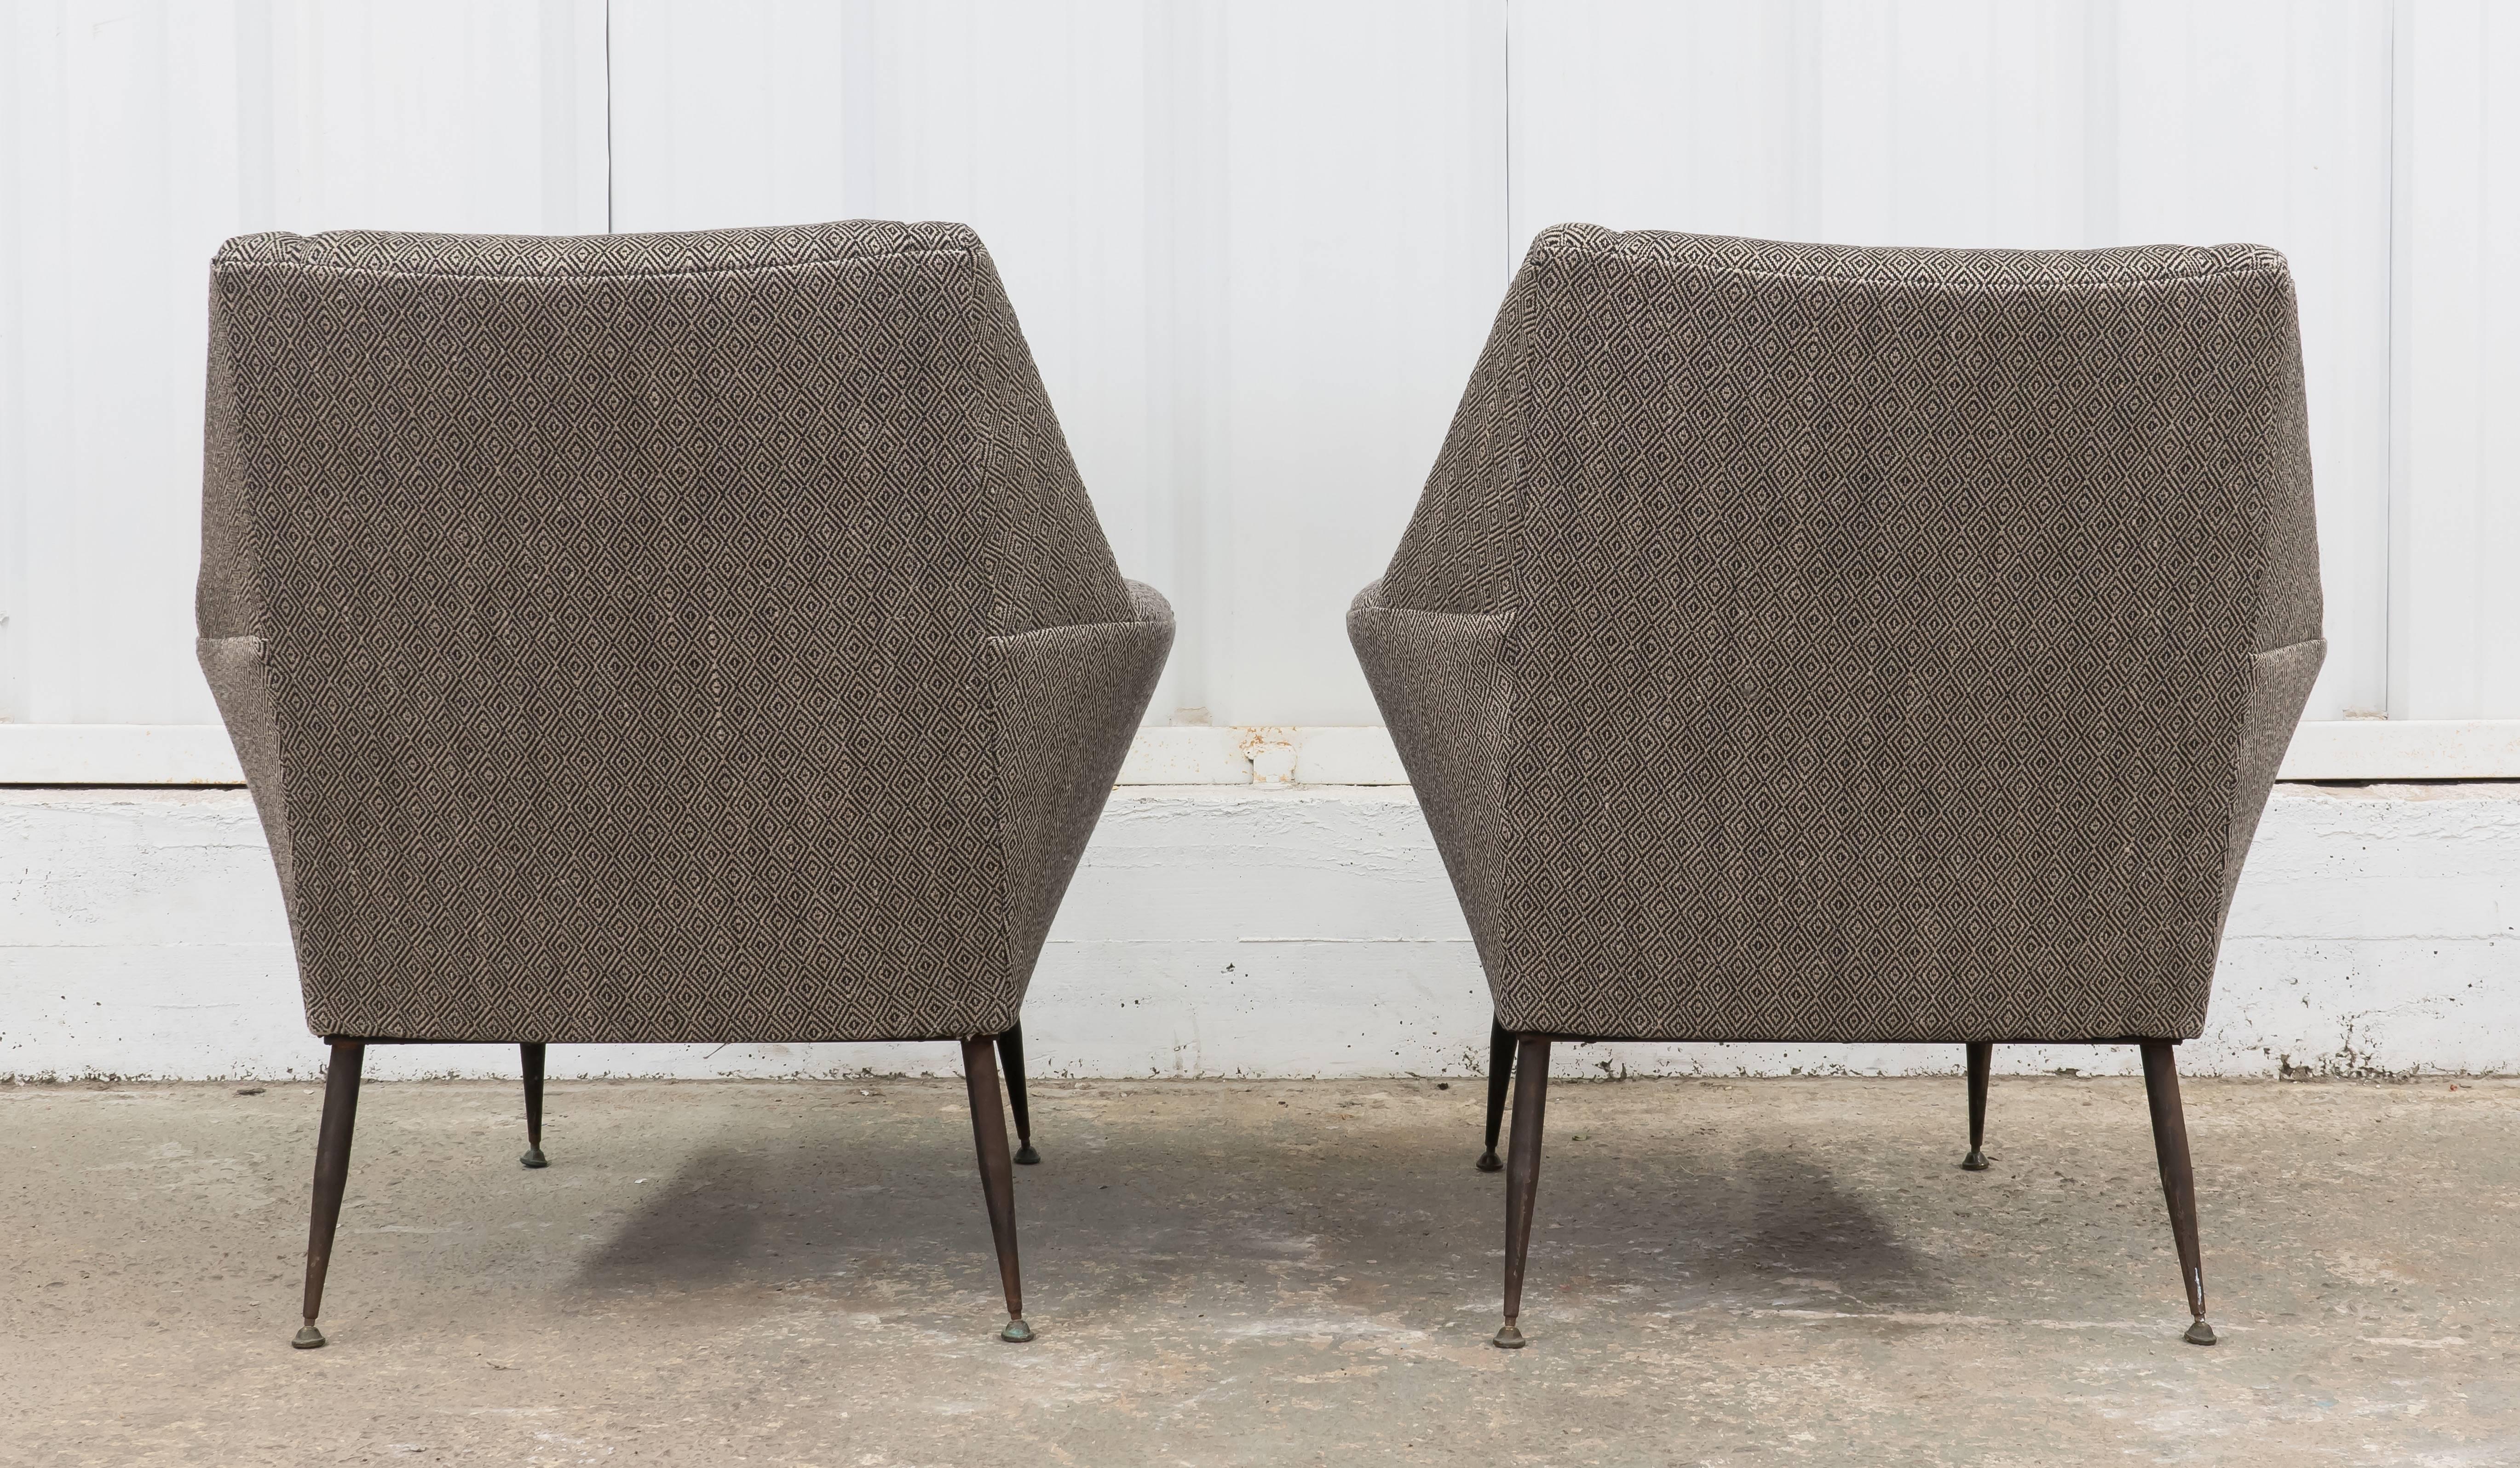 Woven Vintage Italian Armchairs with Metal Legs